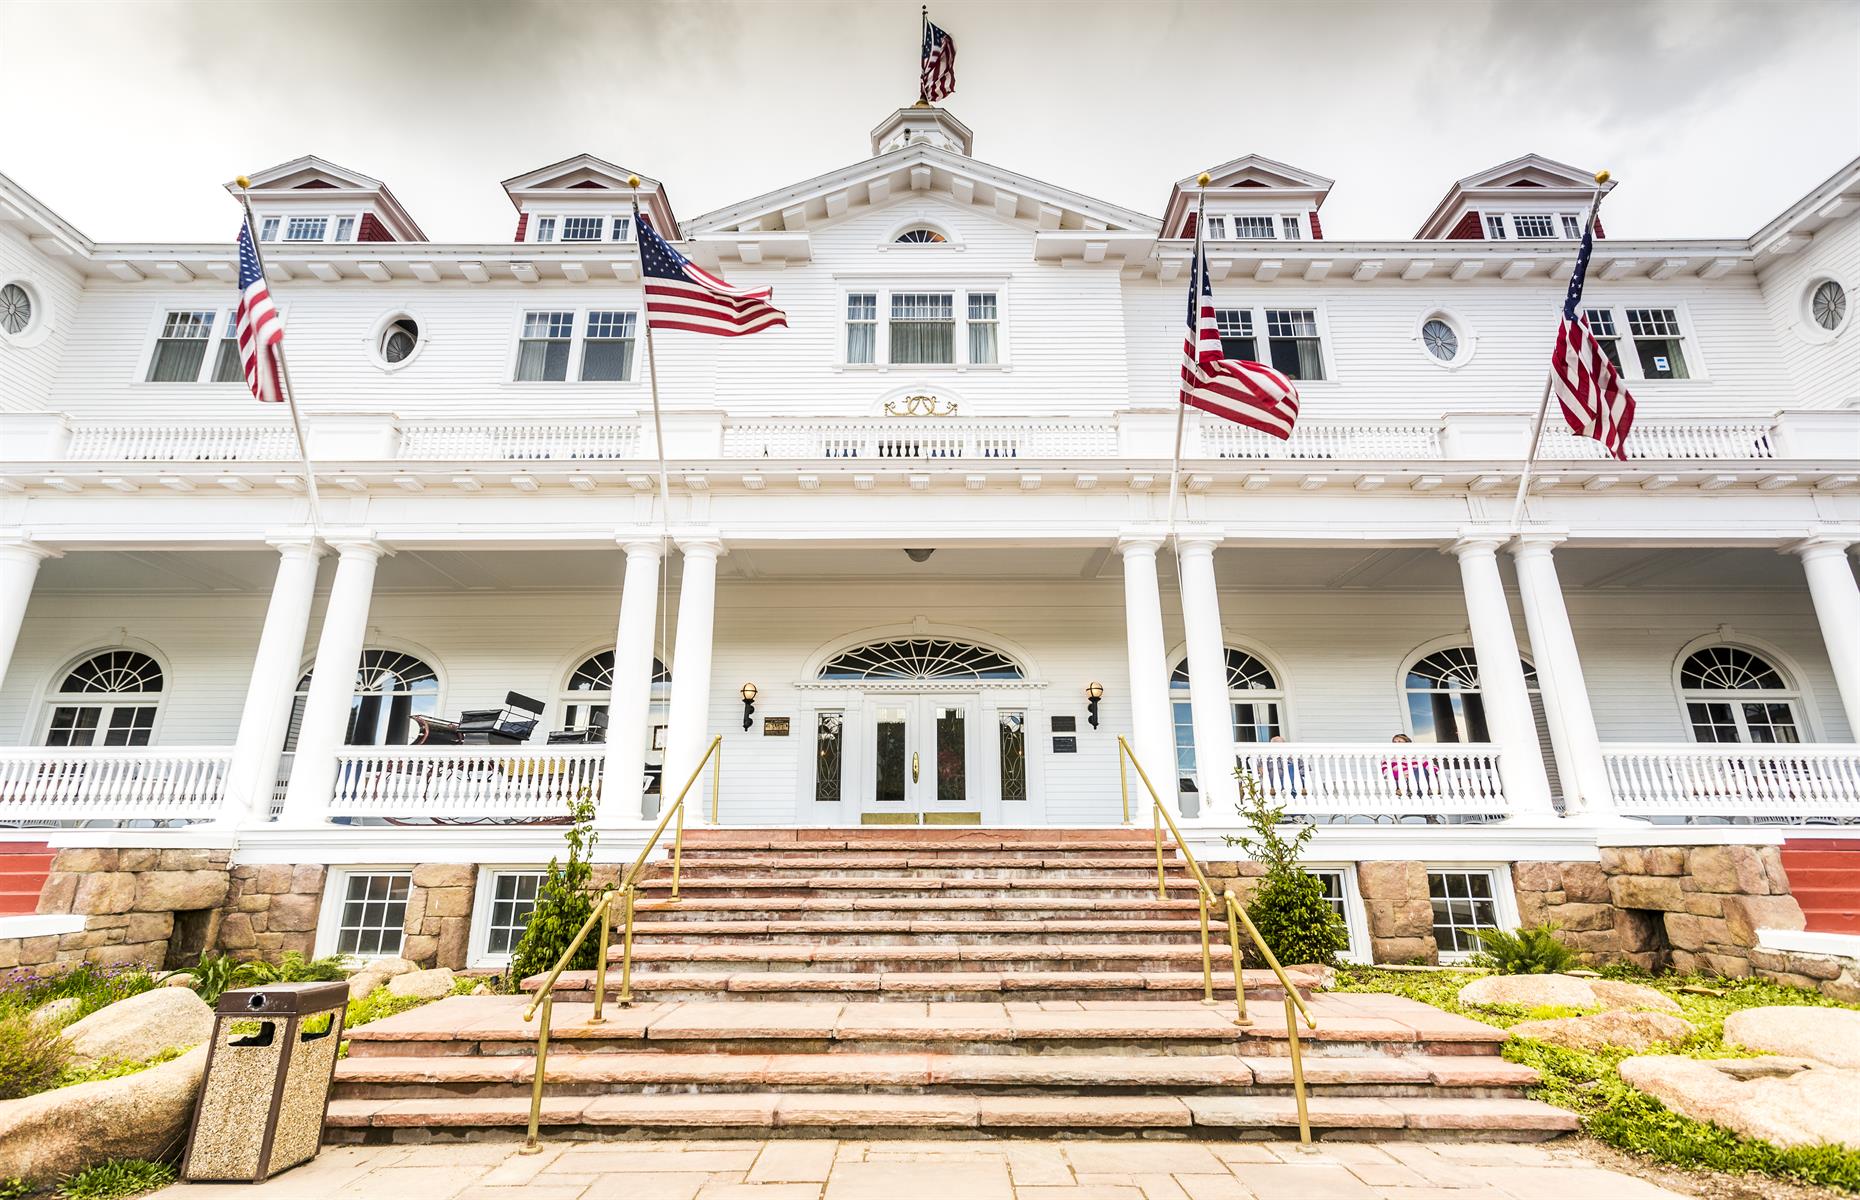 <p>Colorado's <a href="https://www.stanleyhotel.com/">Stanley Hotel</a> is famous as the inspiration for Stephen King's spine-chilling book <em>The Shining</em>, which sees specters send the hotel's winter caretaker spiraling into madness. But, legend has it, the ghosts aren't confined to the pages of a horror novel. Rooms 401, 407, 428 and 217 (where King himself spent the night and where chambermaid Elizabeth Wilson was injured in an explosion) are all reportedly plagued with spirits, including those of former owners the Stanleys themselves. The <a href="https://www.stanleyhotel.com/night-tour.html">Stanley Hotel Spirited Night Tour</a> takes visitors on an hour-long, after-dark tour and reveals the venue's ghostly secrets.</p>  <p><a href="https://www.loveexploring.com/galleries/68140/haunted-hotels?page=1"><strong>These are the world's haunted hotels that will keep you up all night</strong></a></p>